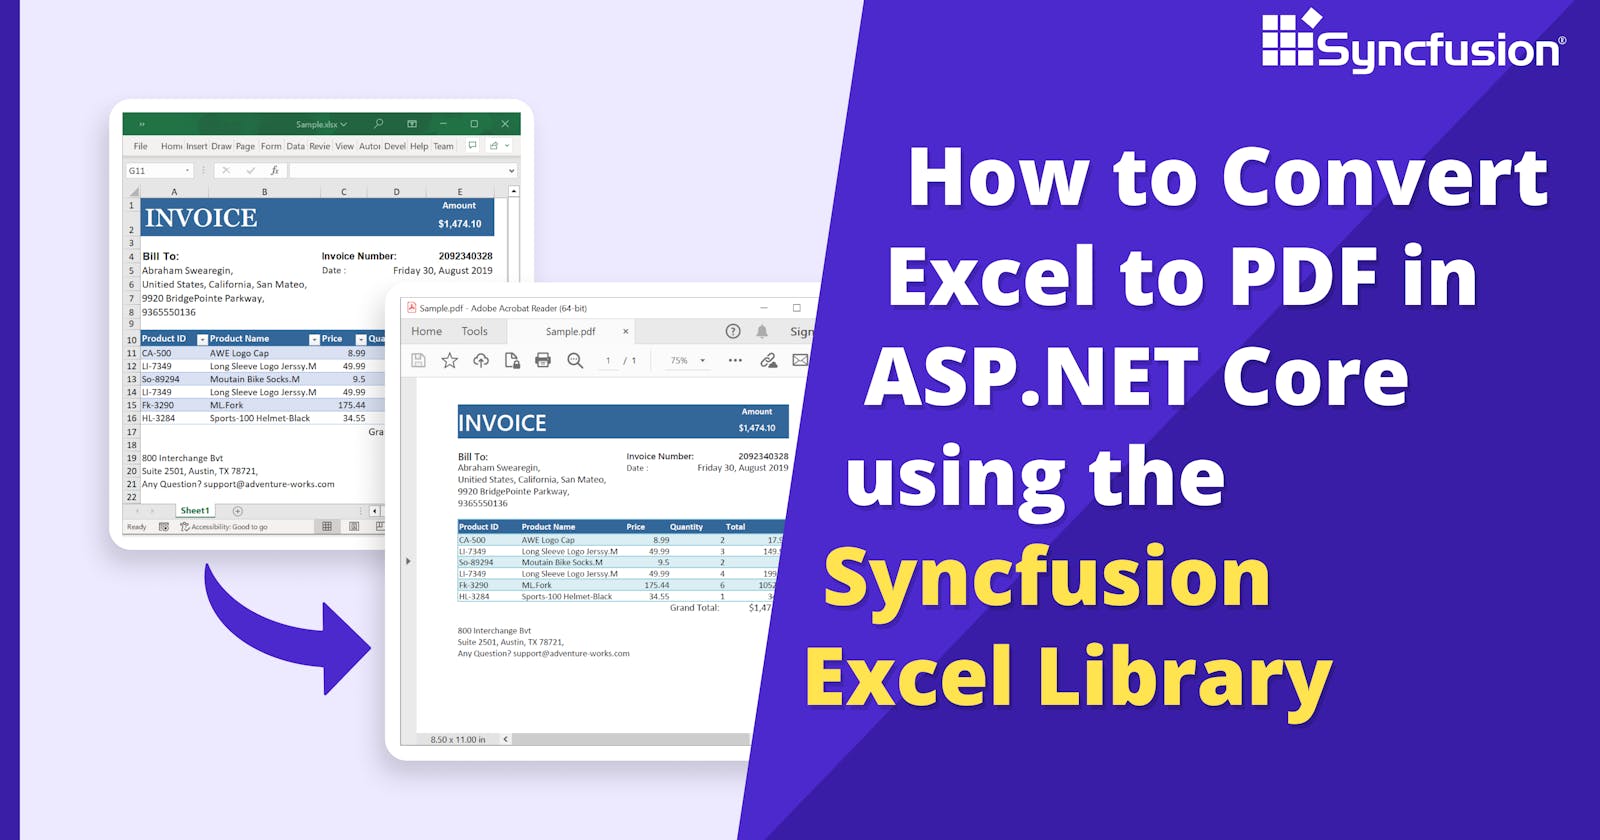 How to Convert Excel to PDF in ASP.NET Core using the Excel Library